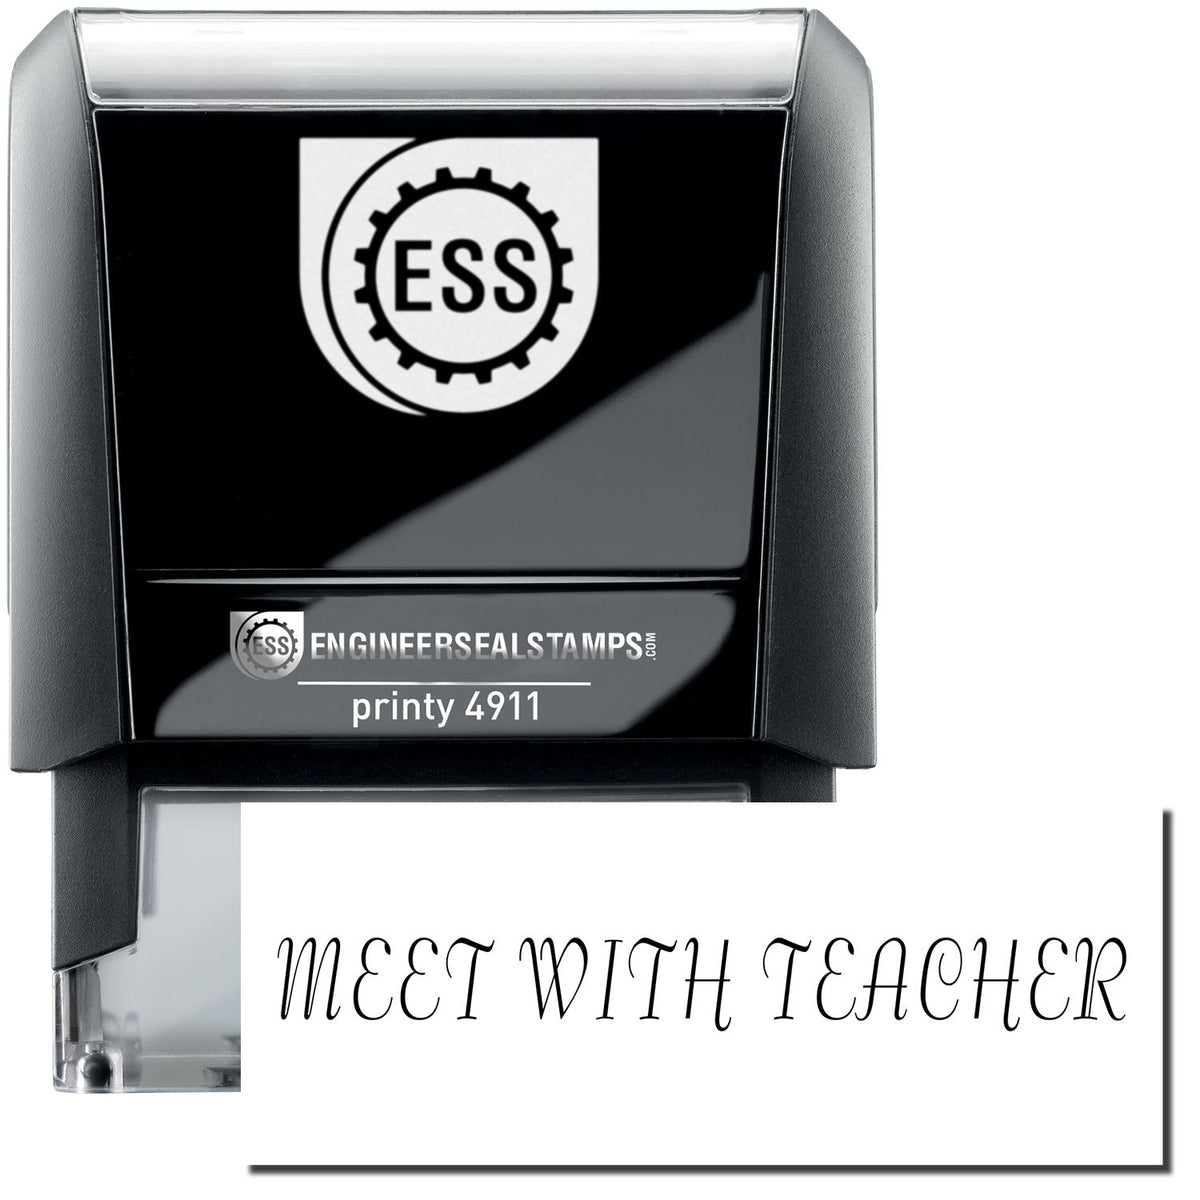 A self-inking stamp with a stamped image showing how the text &quot;MEET WITH TEACHER&quot; is displayed after stamping.